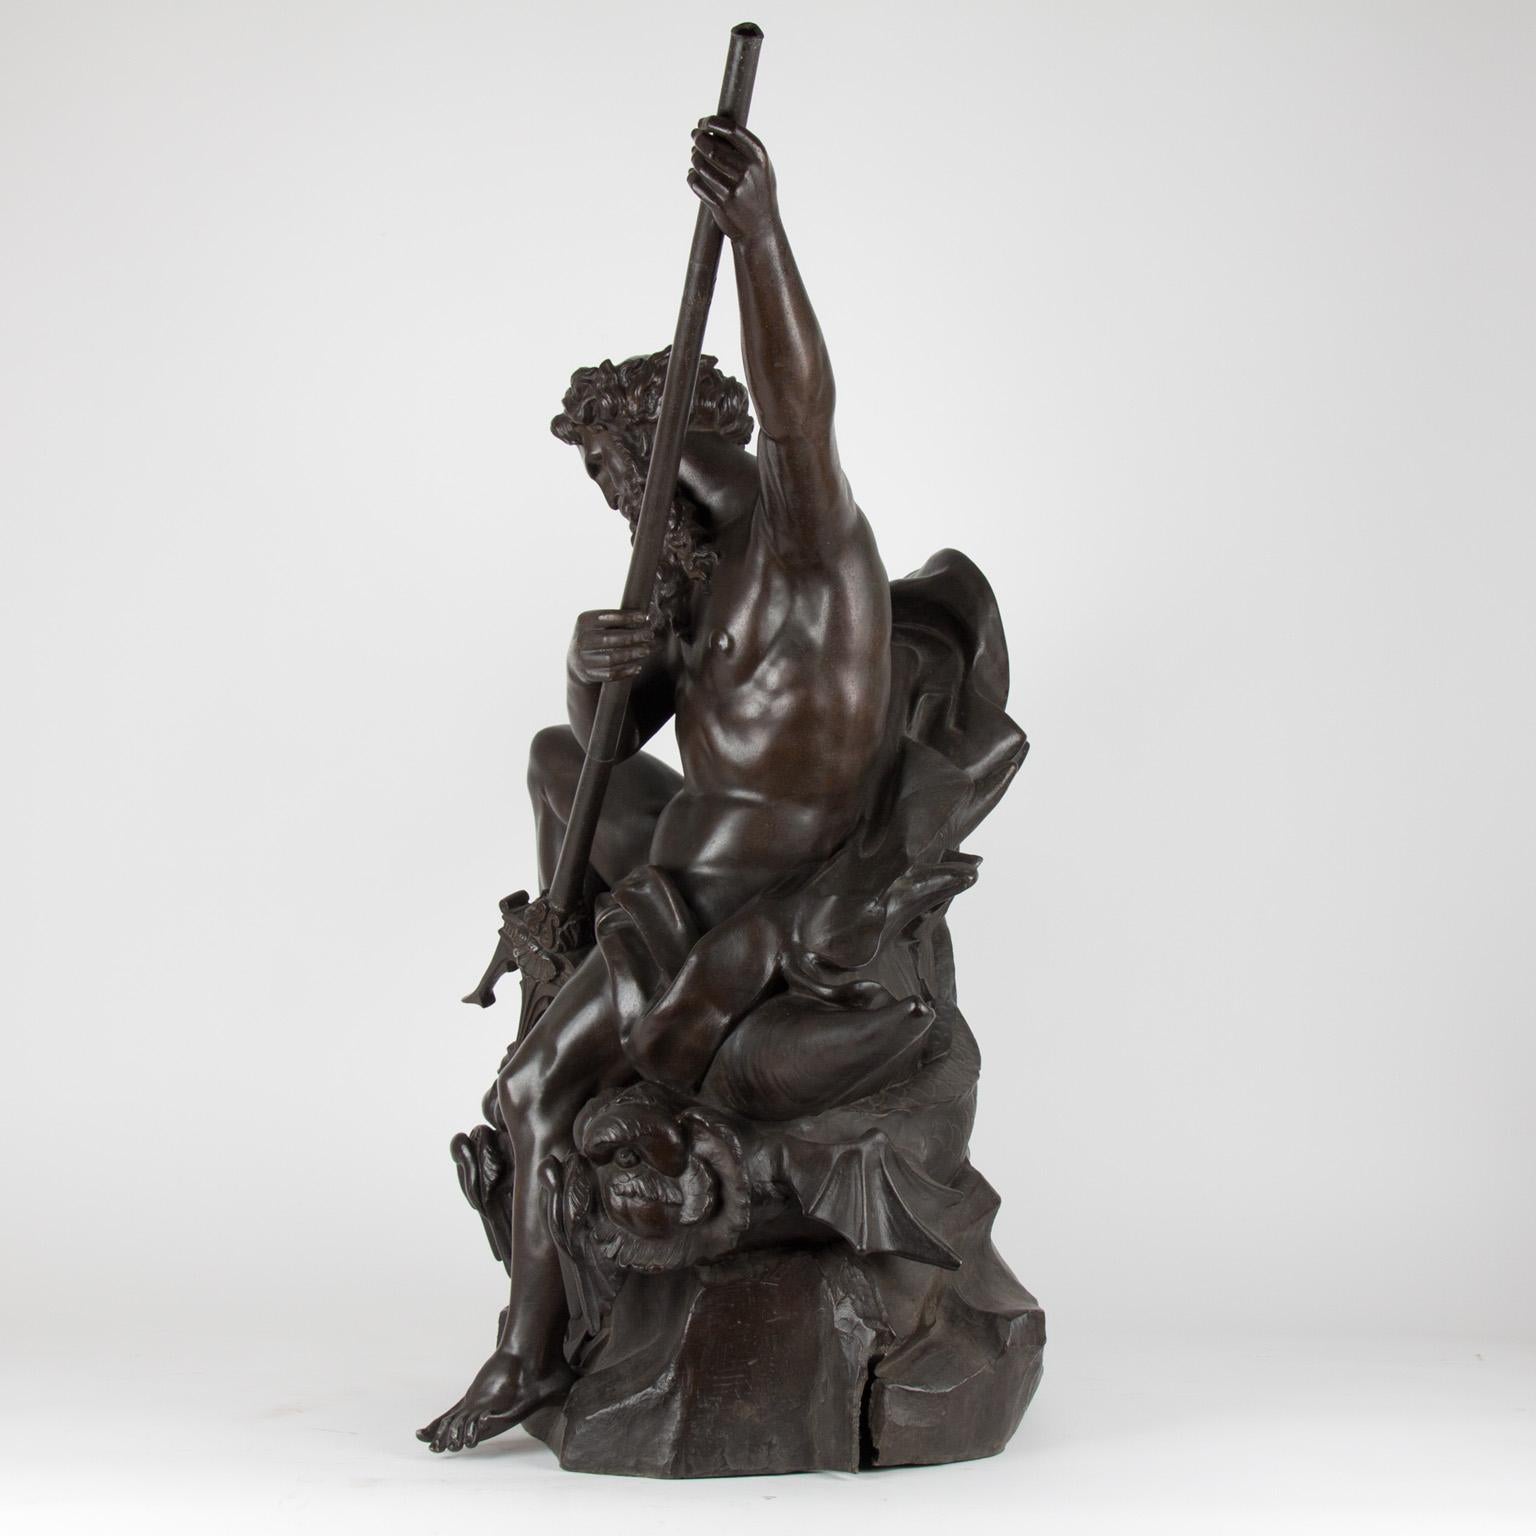 German Large 19th Century Zamac Statue Depicting Neptune Sitting on Two Dolphins